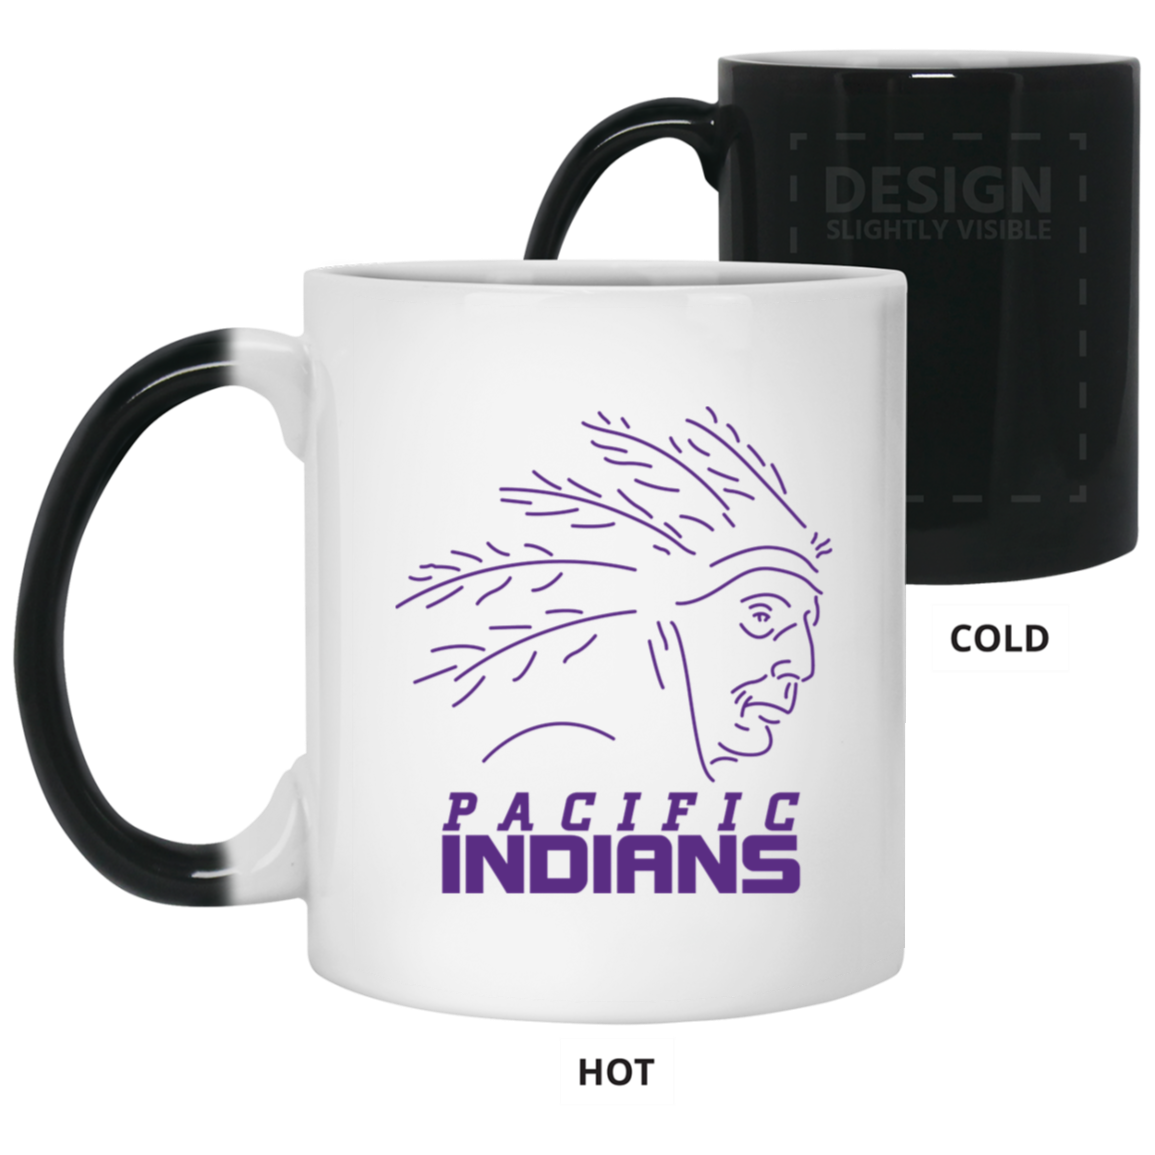 Pacific Indians Sports Club - MUGS